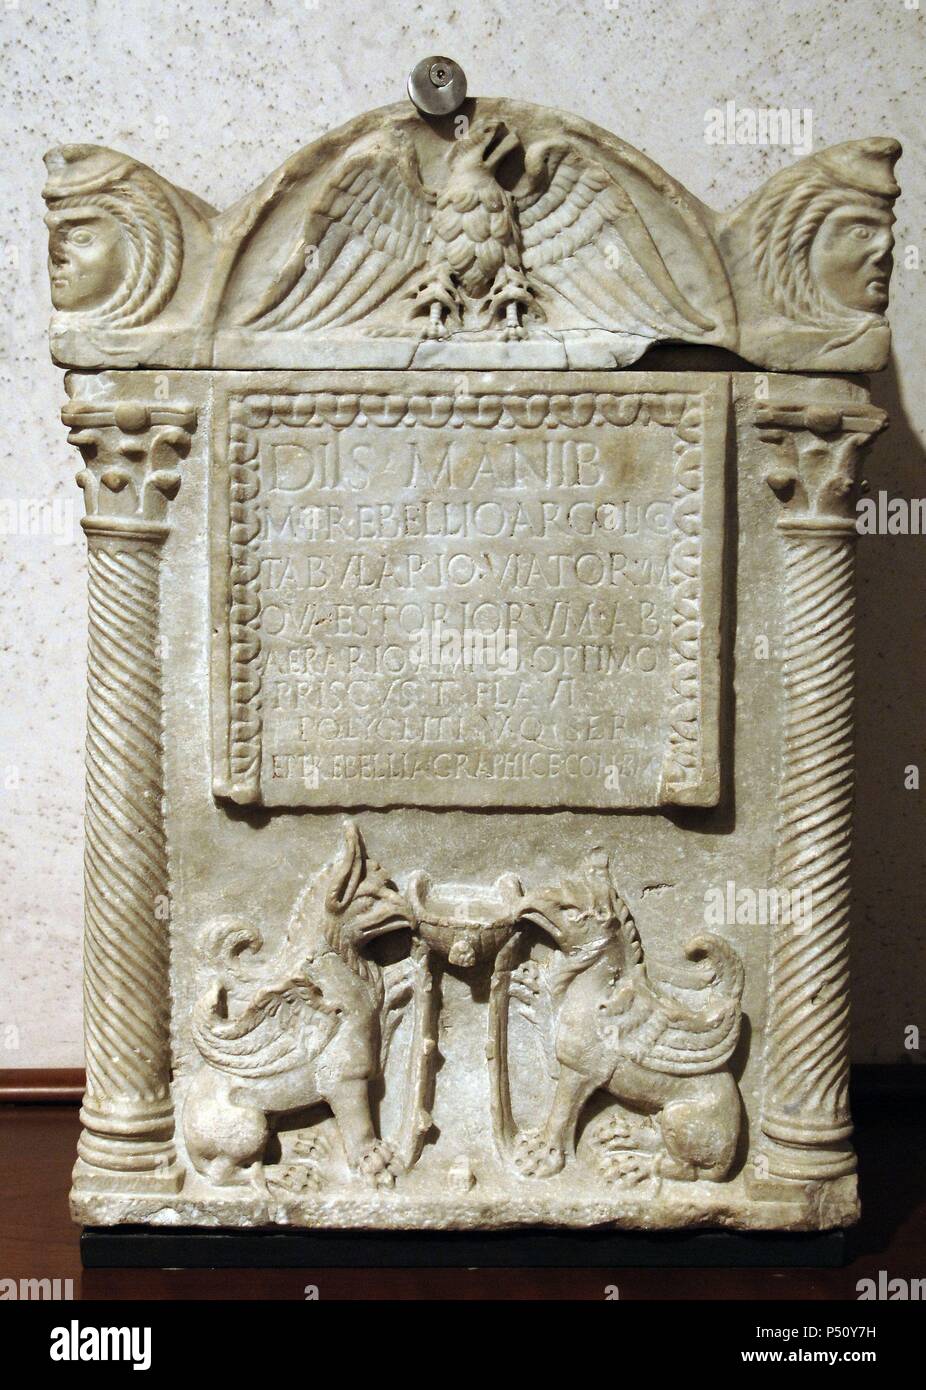 Roman art. The cinerary altar of M. Trebellius Argoliucus, dedicated by his friend Priscus. The deceased was an archivist. From the Gate of St. Sebastian. National Roman Museum (Baths of Diocletian). Rome, Italy. Stock Photo